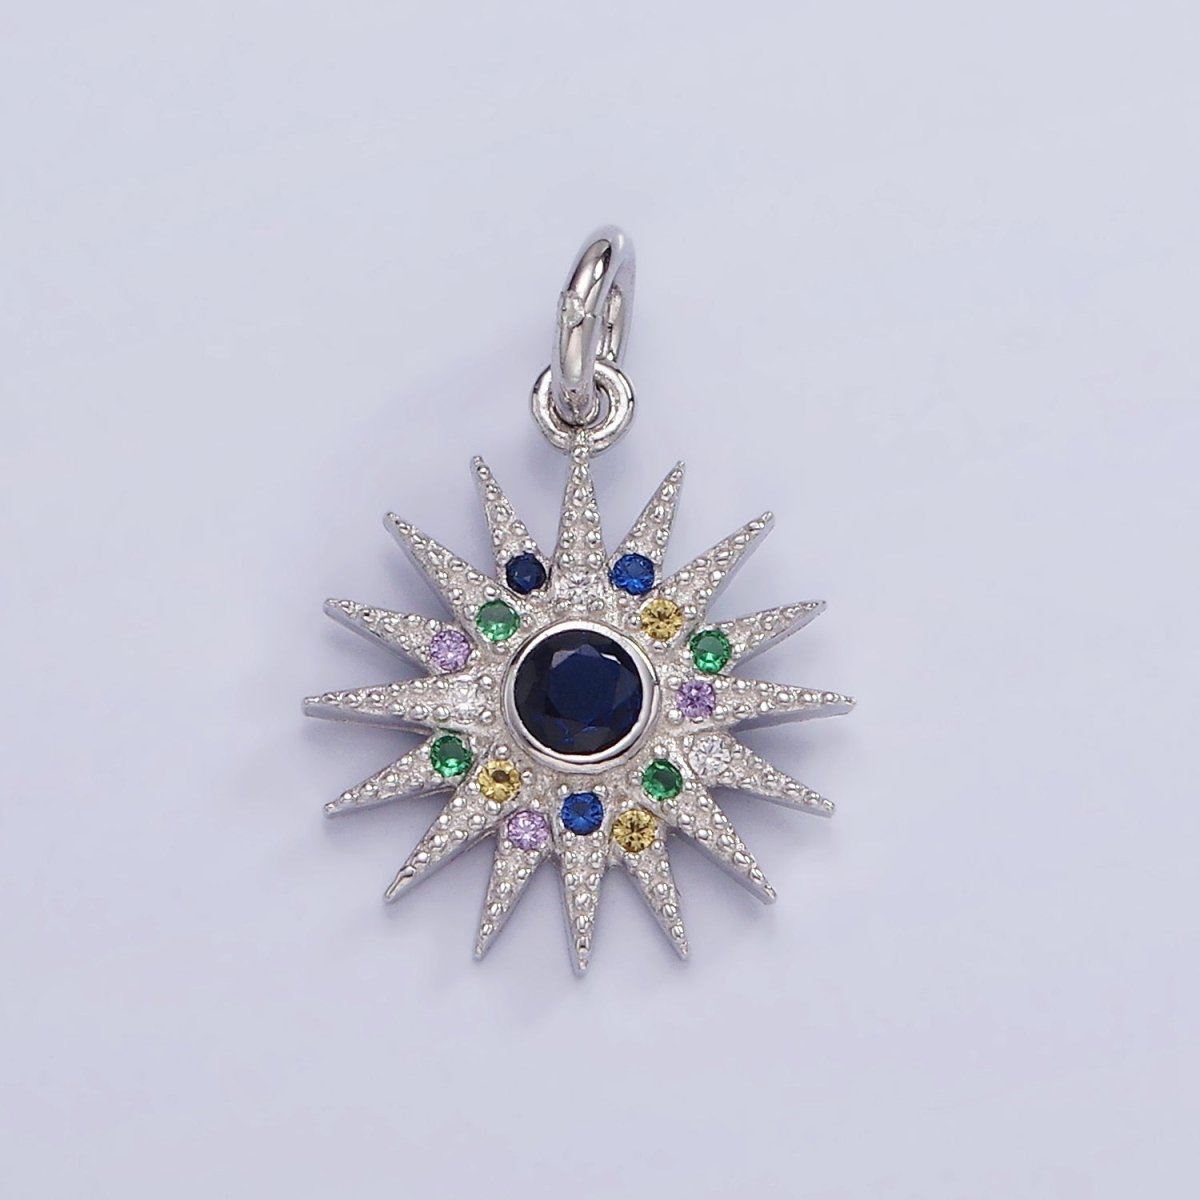 S925 Sterling Silver 13mm Sunburst Charm with Colorful Cz Stone | SL-480 - DLUXCA